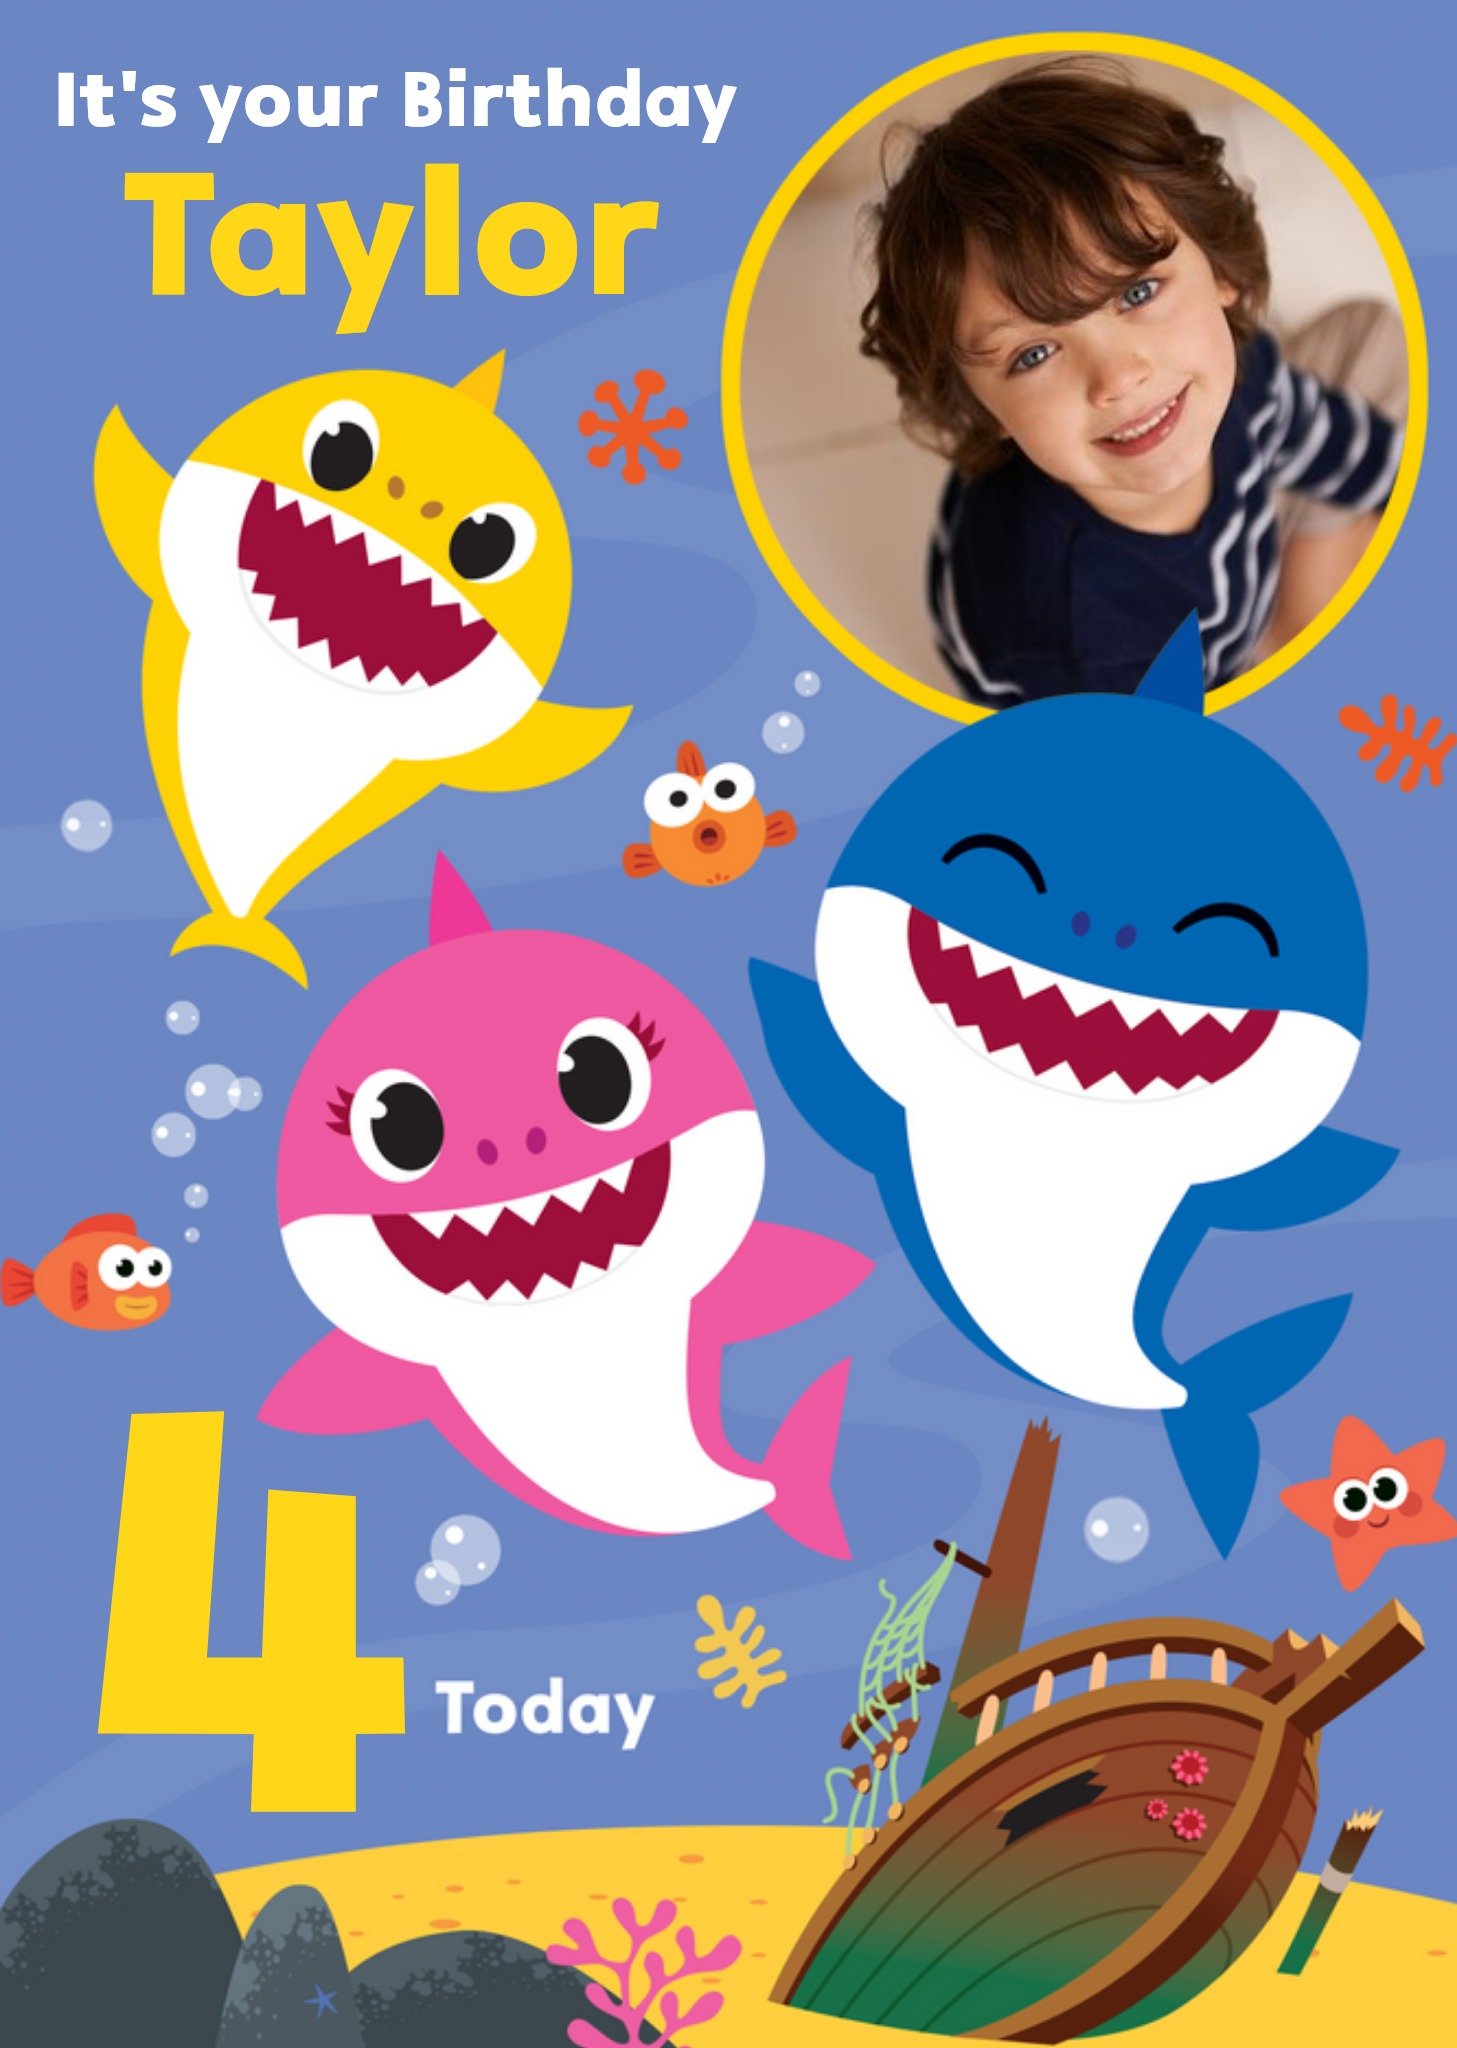 Baby Shark Song Kids 4 Today Photo Upload Birthday Card, Large